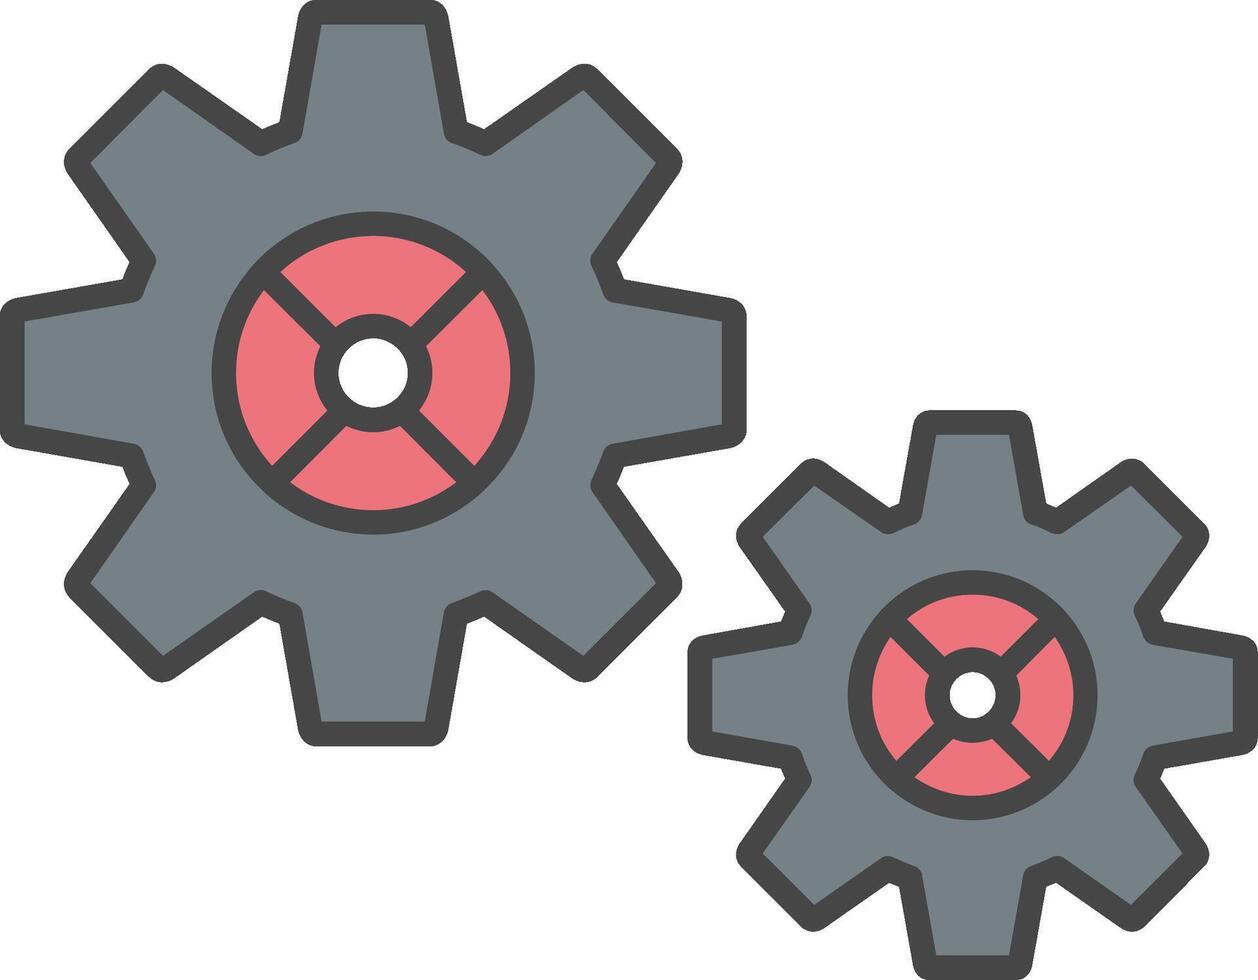 Gear Line Filled Light Icon vector